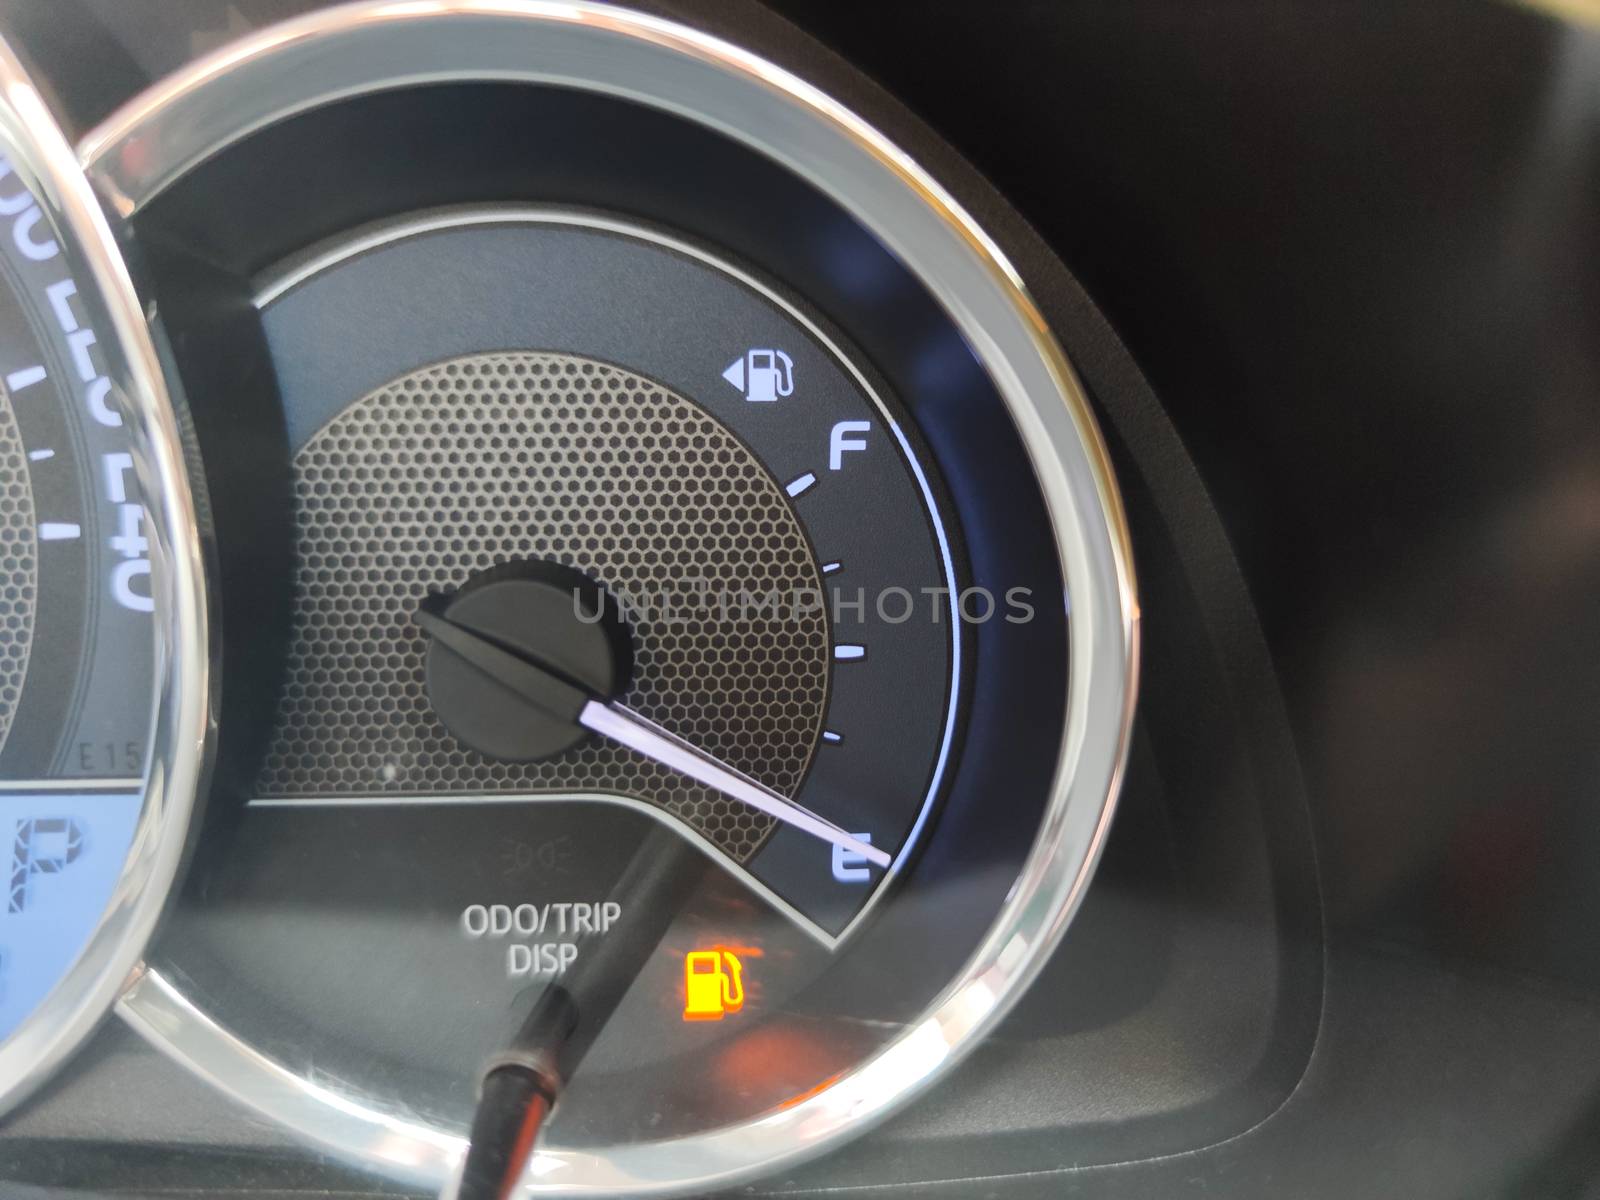 close-up fuel gauge showing empty tank with yellow light glowing by tidarattj